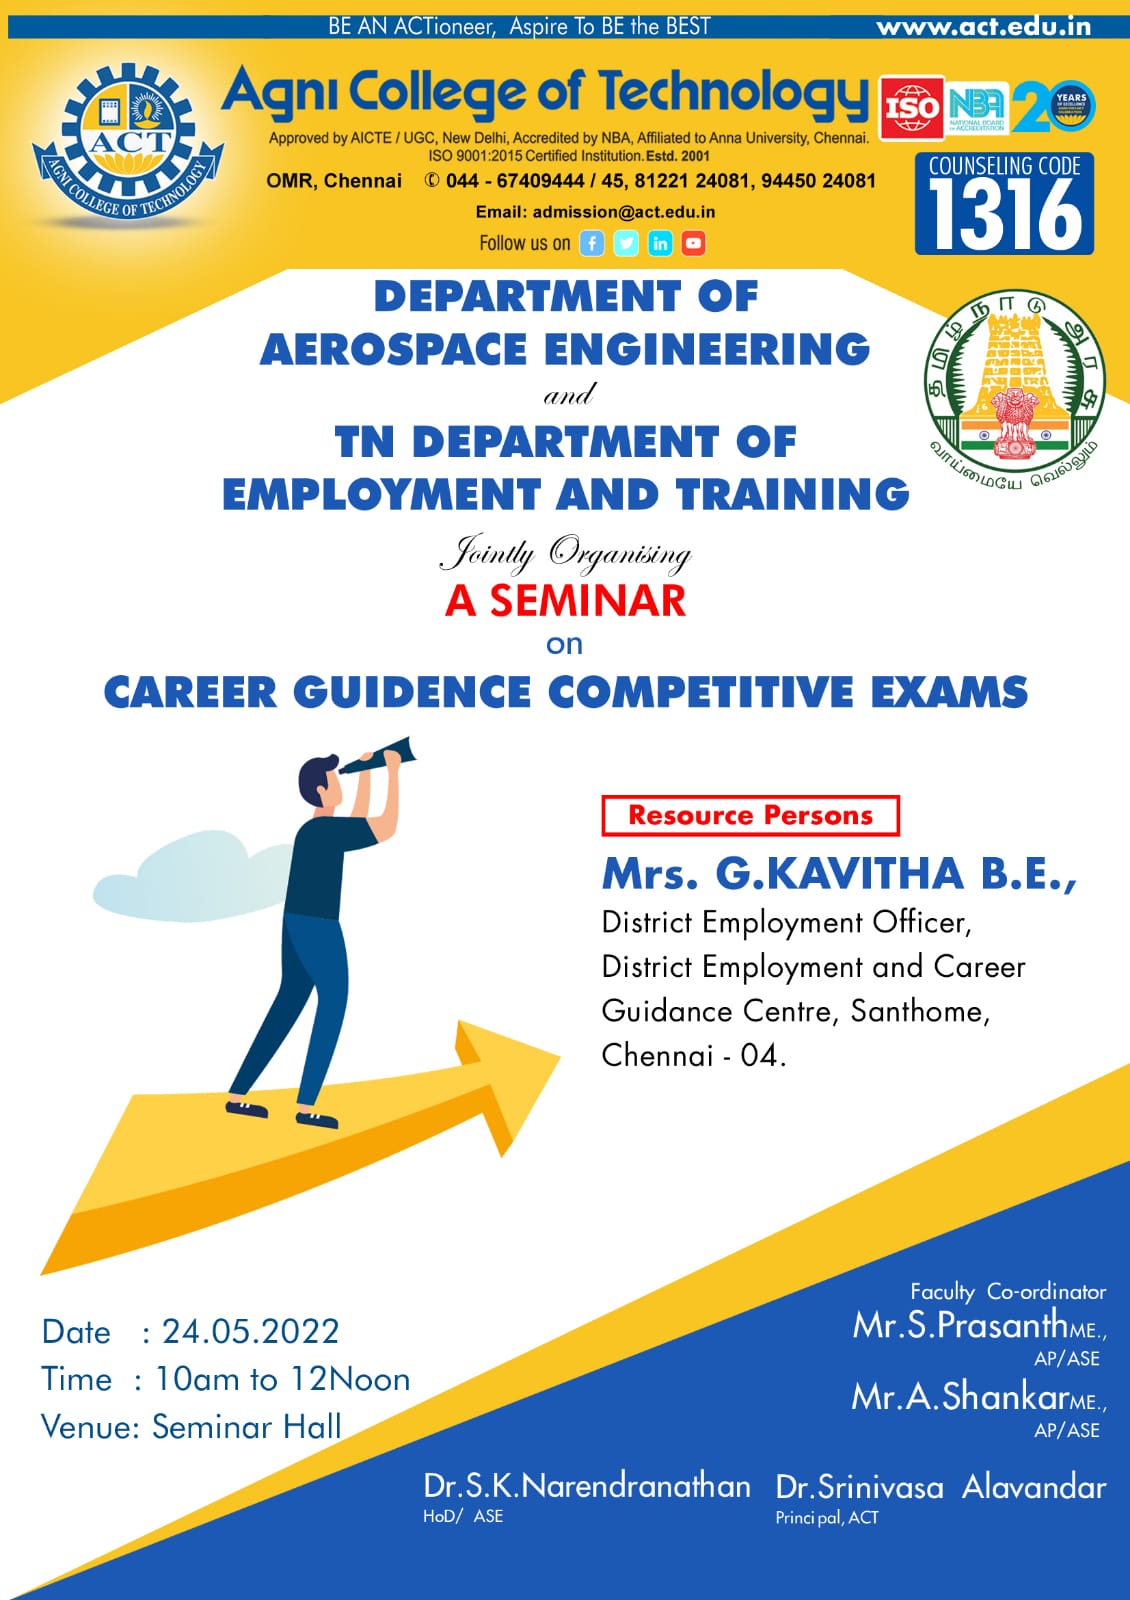 Seminar for Career Guidance on Competitive Exams